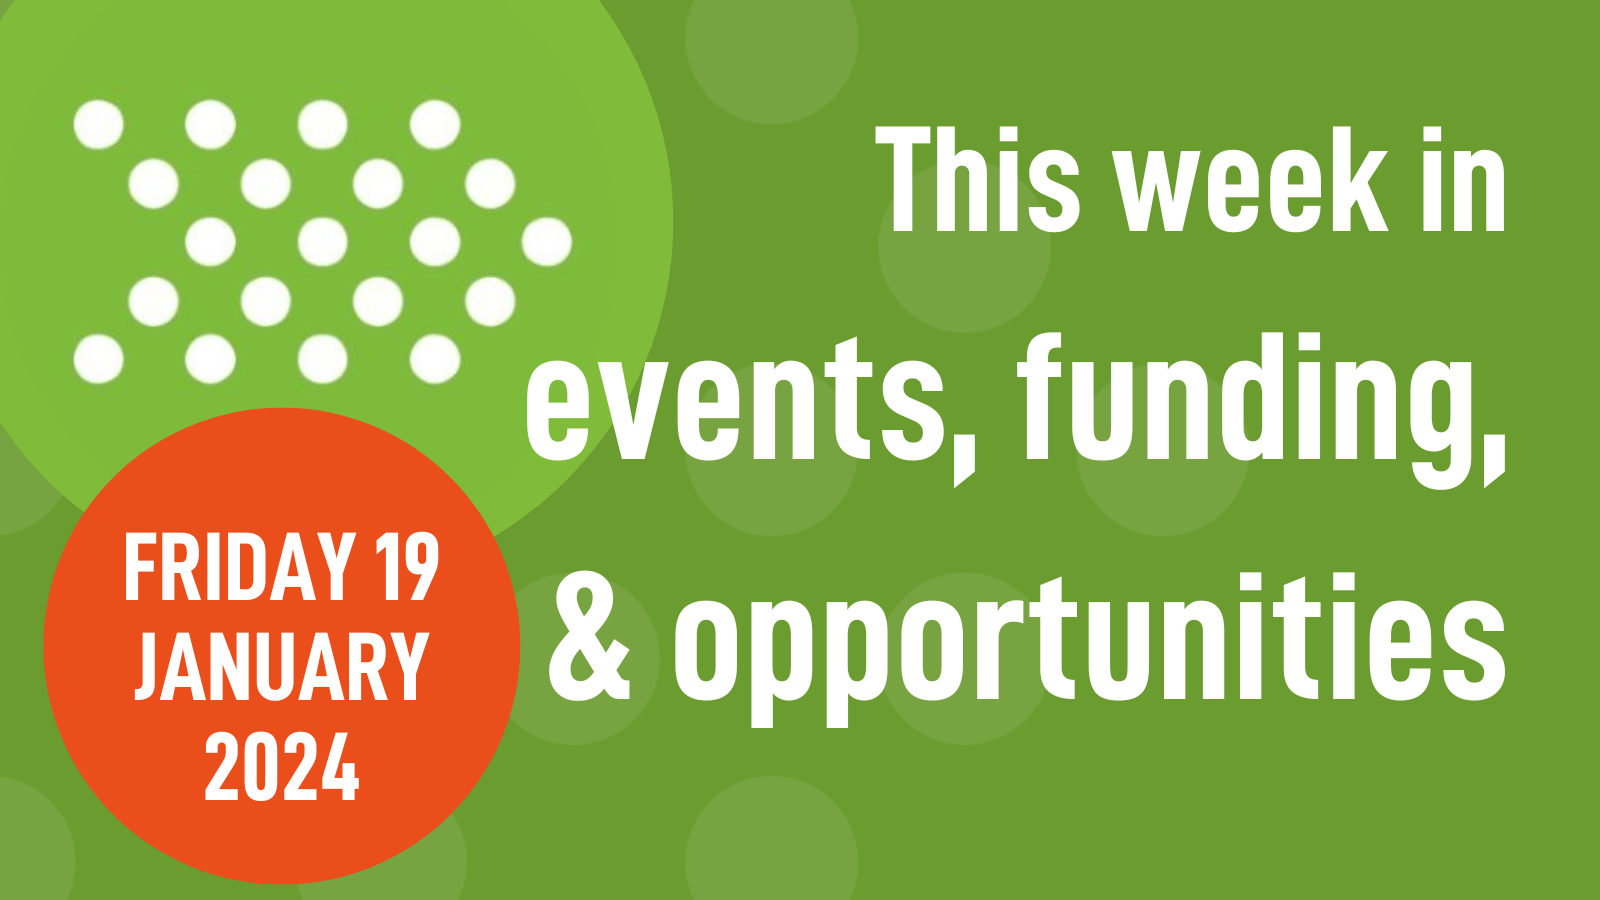 Weekly roundup 19/01/24: events, funding, & opportunities in mental health research